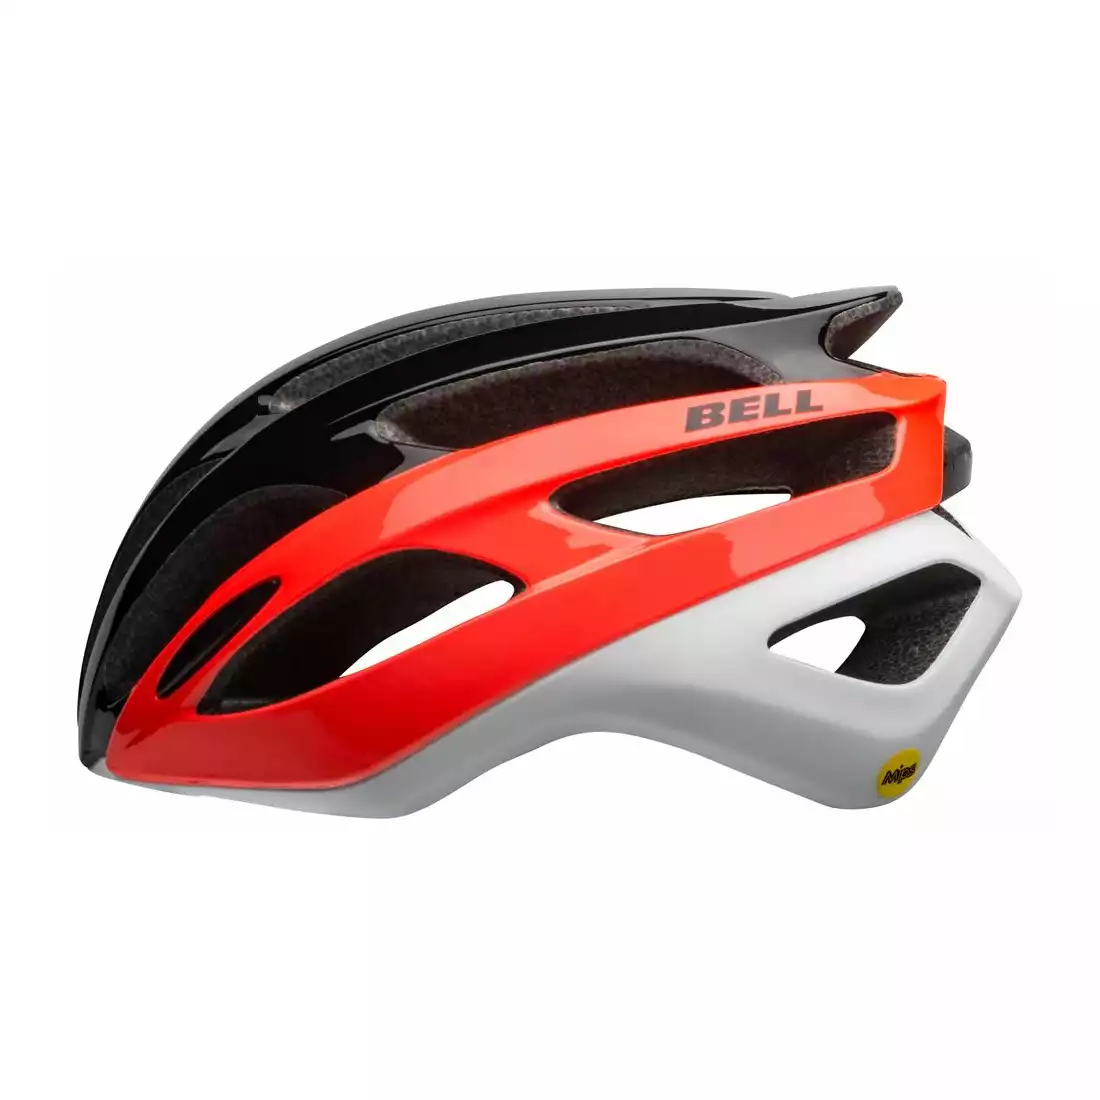 New Bell Event Bike Helmet Medium Matte Infrared Red Black Road Cycling Vented 